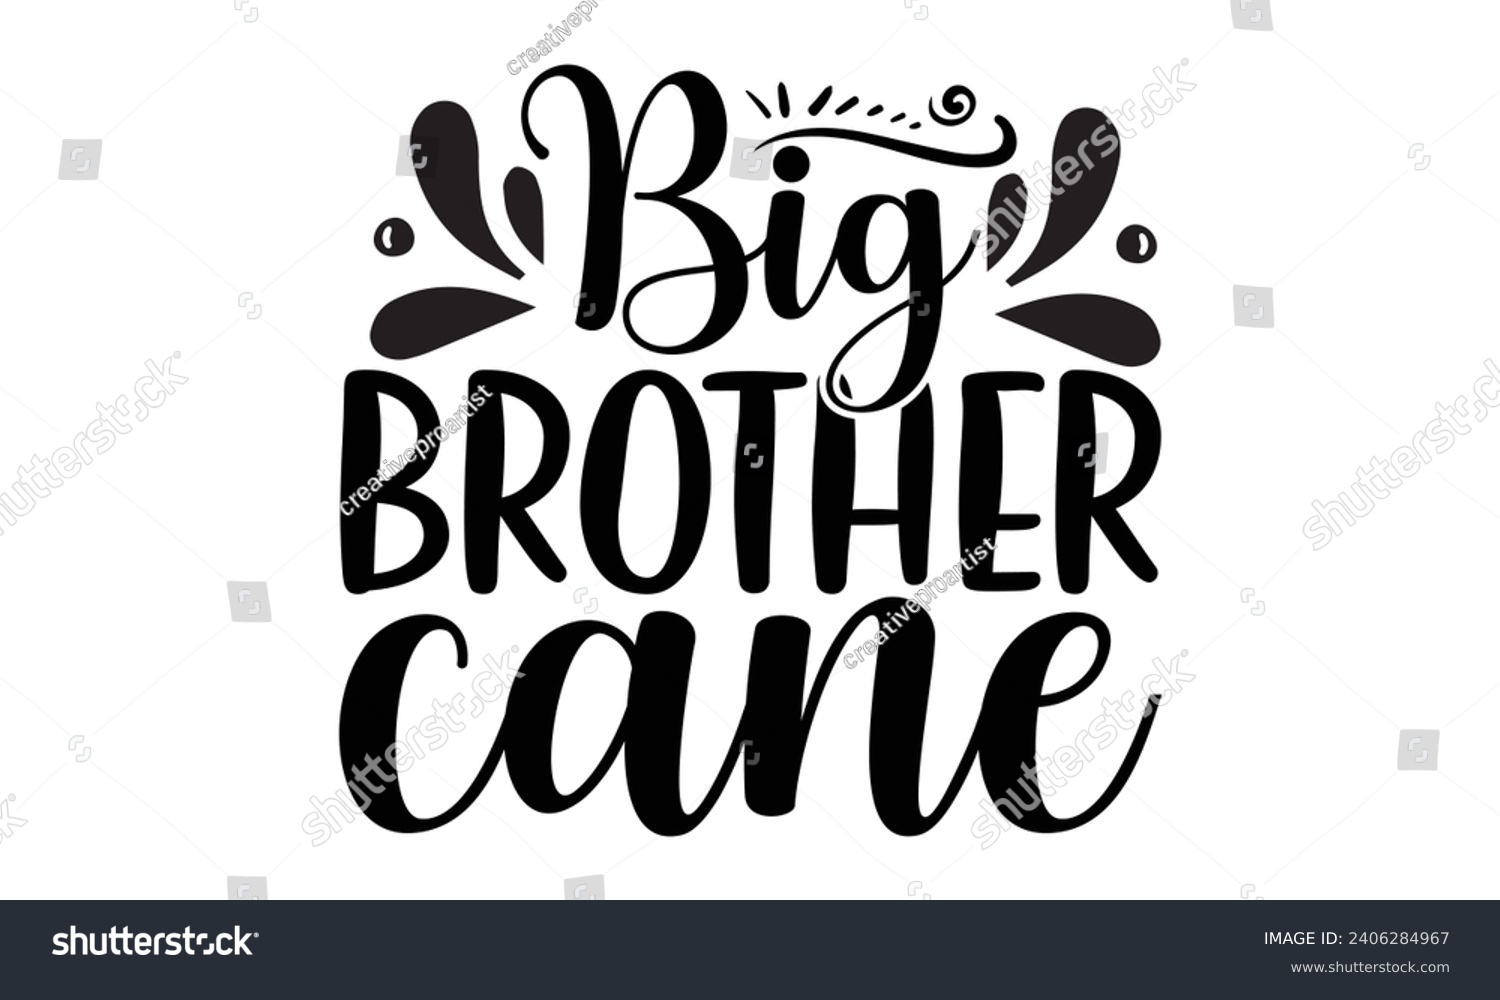 SVG of Big Brother Cane- Best friends t- shirt design, Hand drawn lettering phrase, Illustration for prints on bags, posters, cards eps, Files for Cutting, Isolated on white background. svg